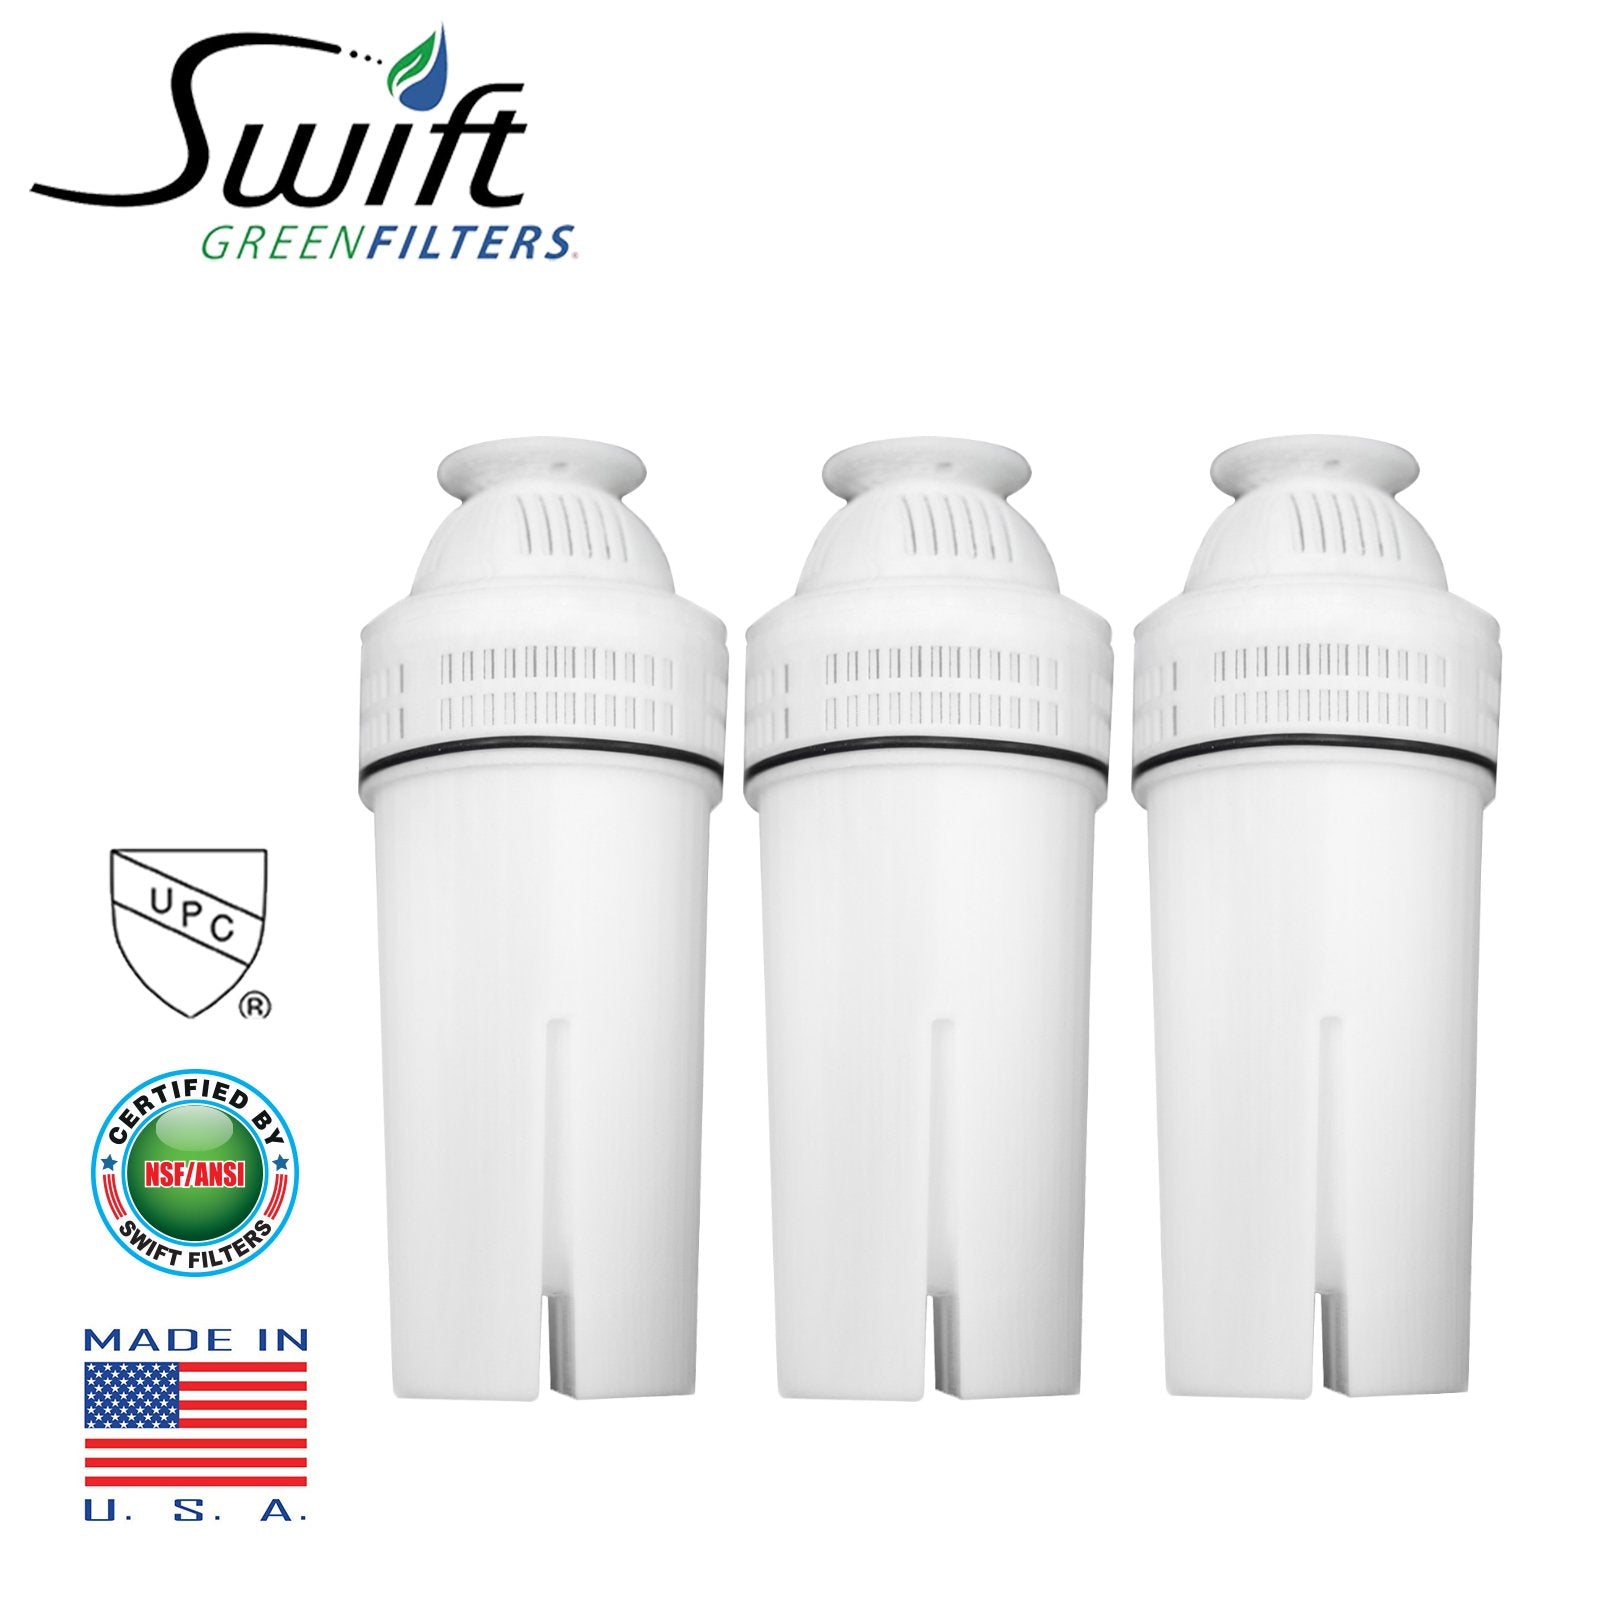 Swift Green Filters Brita Pitcher Water Filtration Replacement Filter, White SGF-B-P -VOC